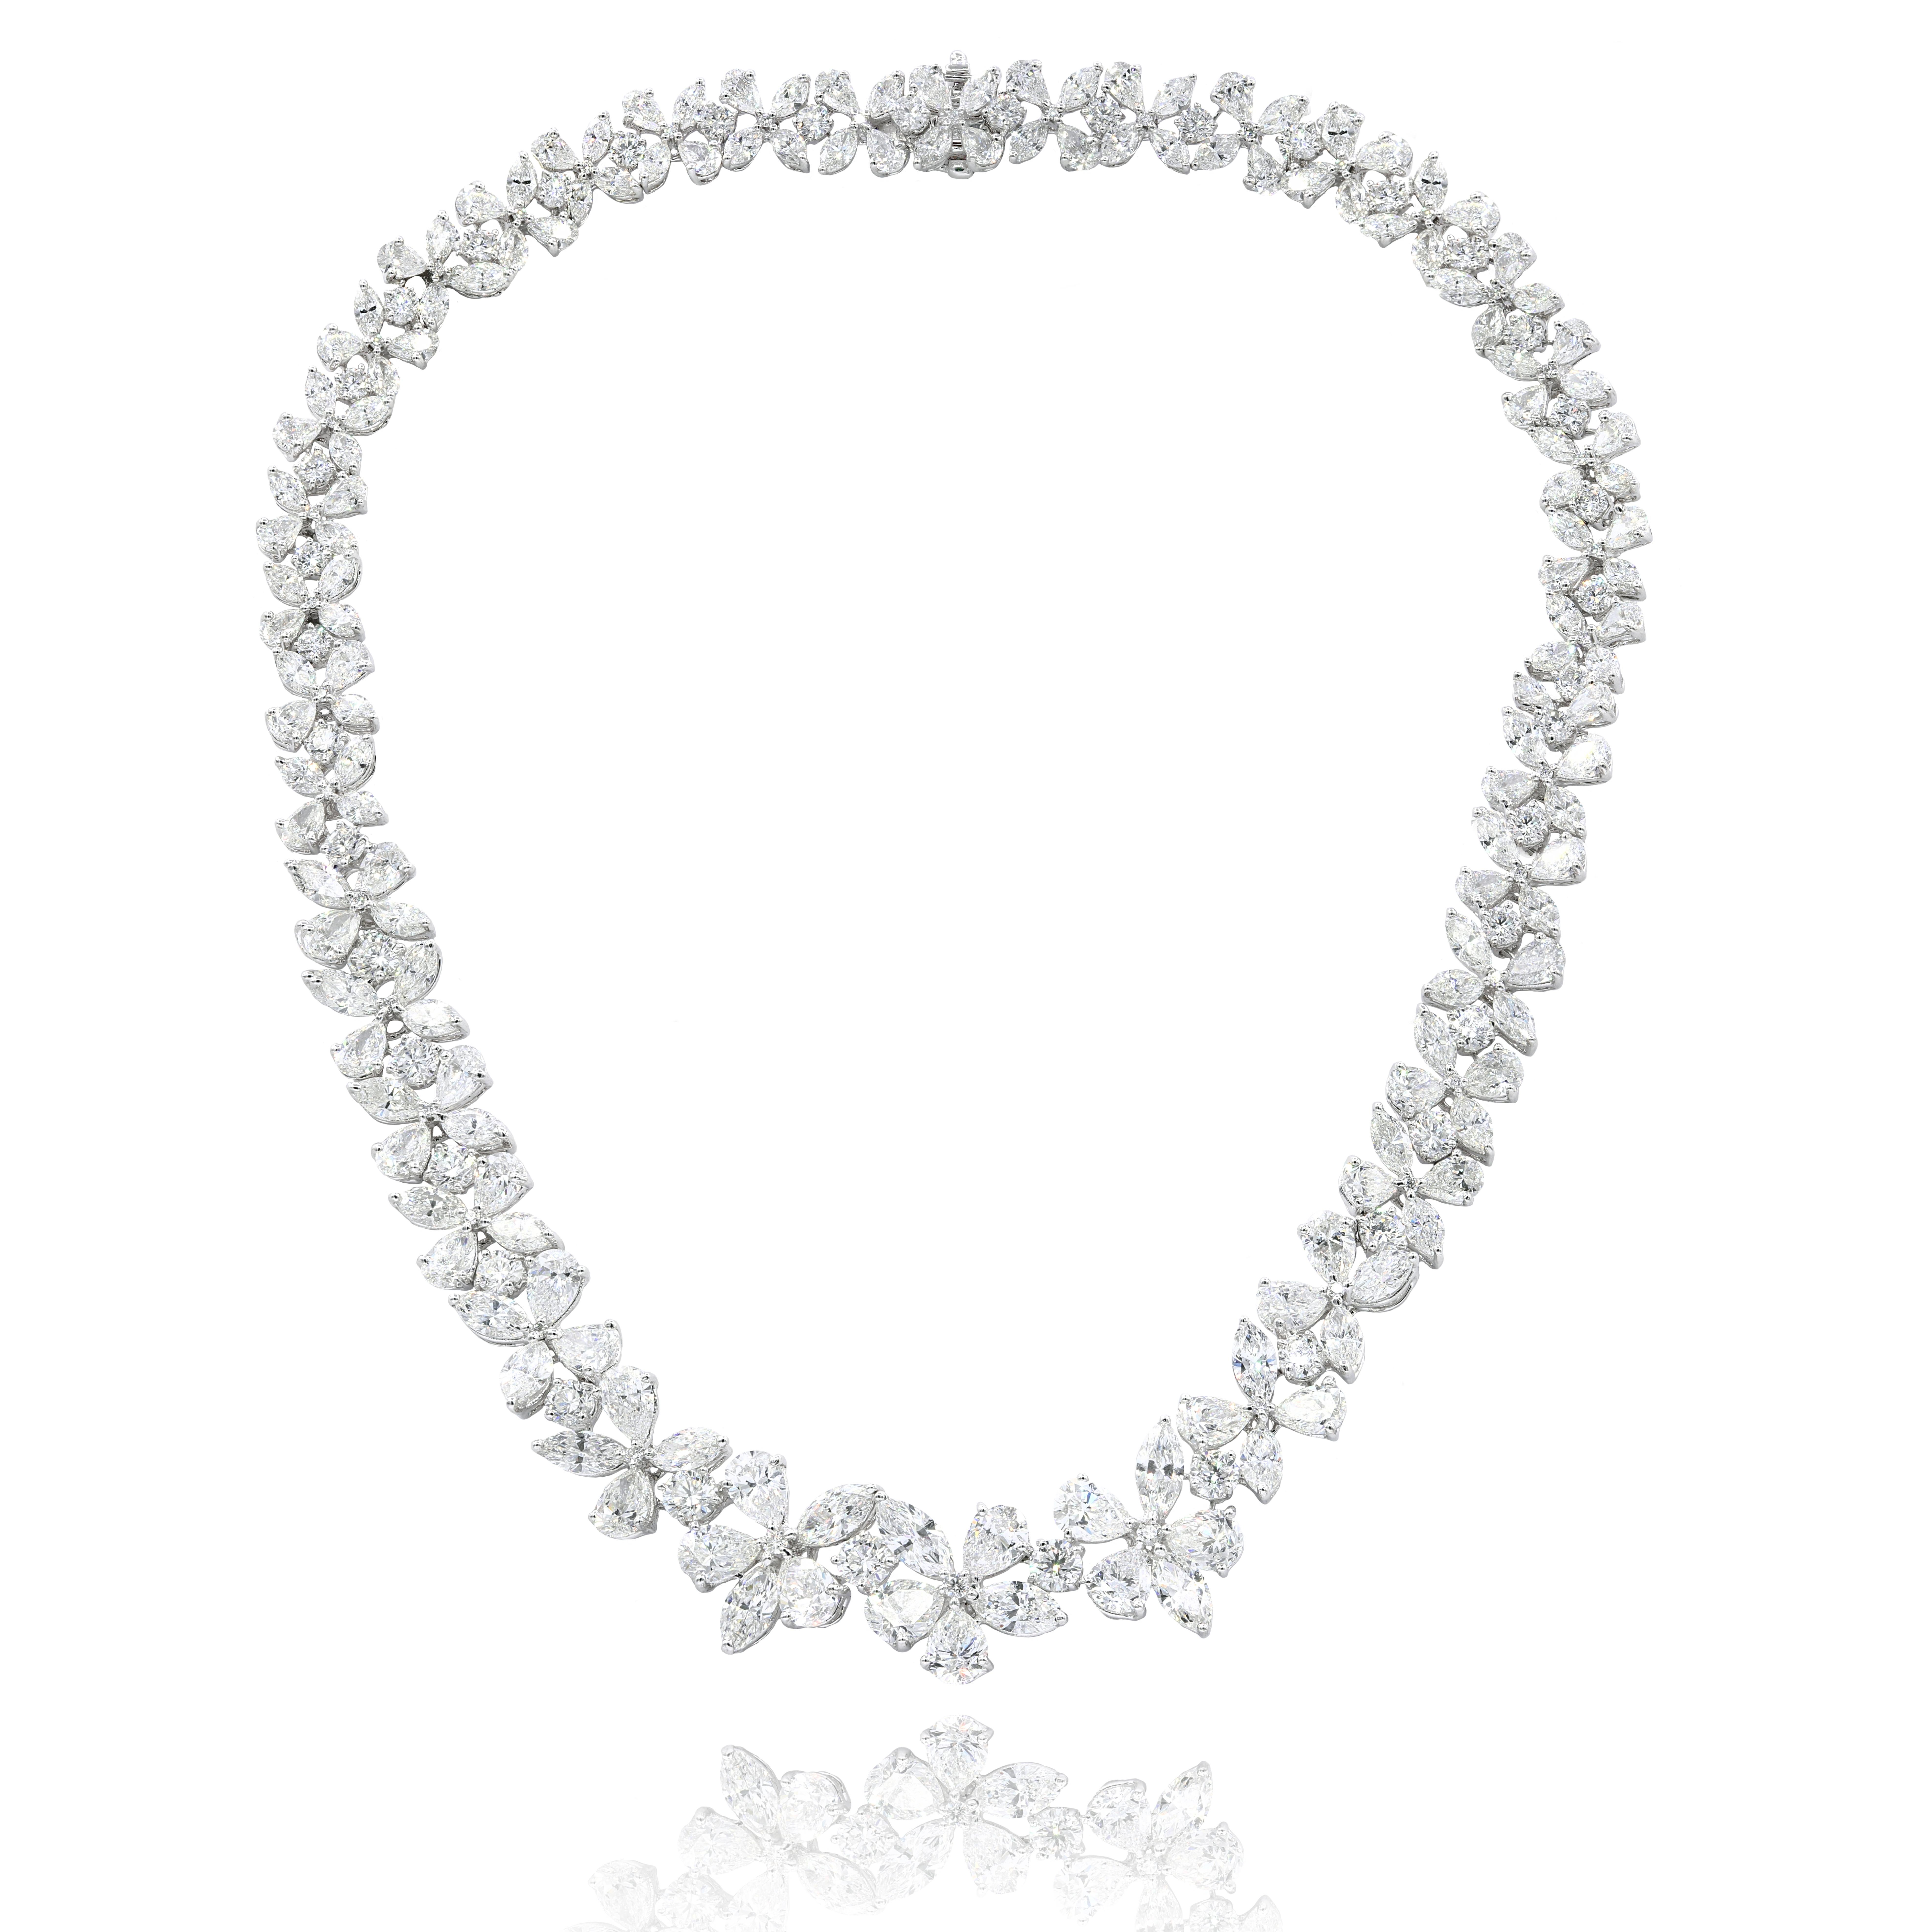 Platinum flower necklace featuring 52.15 cts of diamonds with round and pear shapes
Diana M. is a leading supplier of top-quality fine jewelry for over 35 years.
Diana M is one-stop shop for all your jewelry shopping, carrying line of diamond rings,